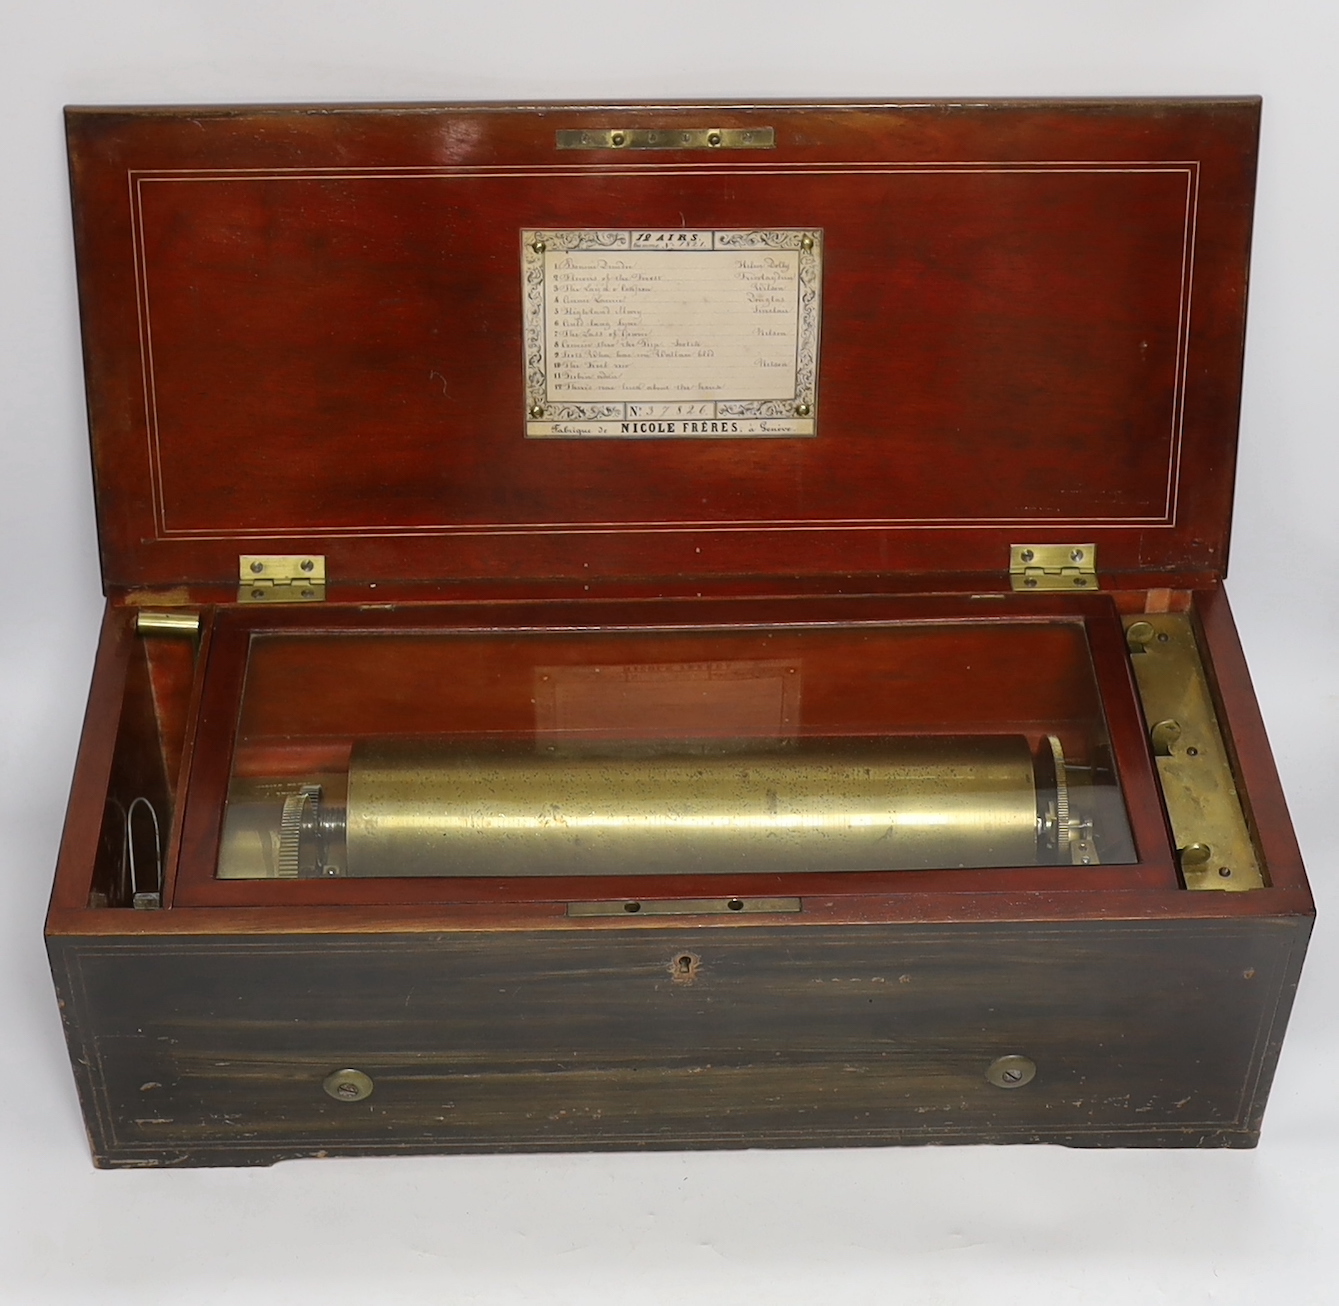 A late 19th century Swiss rosewood inlaid cylinder music box by Nicole Freres, playing twelve airs on one hundred and twenty-nine teeth, barrel 31cm wide, case 53cm wide, 22.5cm deep, 17cm high